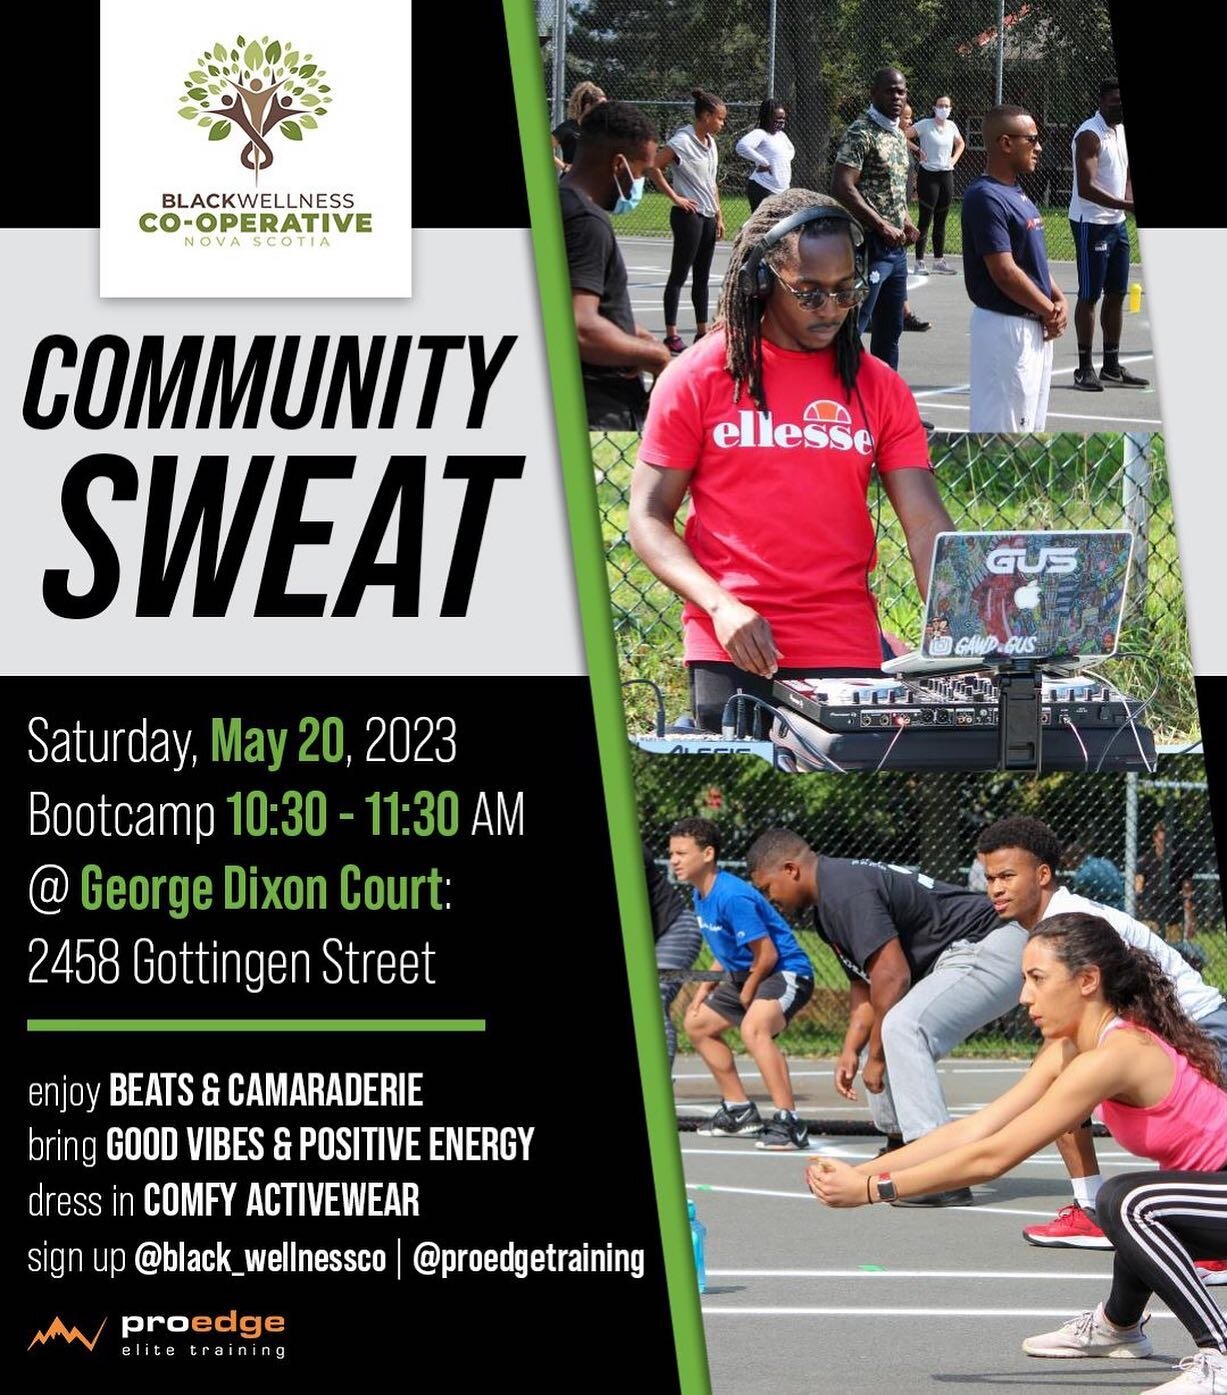 Our first outdoor bootcamp of the season !! 👊🏾

📆 Saturday May 20th
⏰ 10:30am 
📍 George Dixon basketball court 

Bring your friends and family for a fun all inclusive outdoor workout hosted by us! 

We&rsquo;ve been busy planning the summer, and 